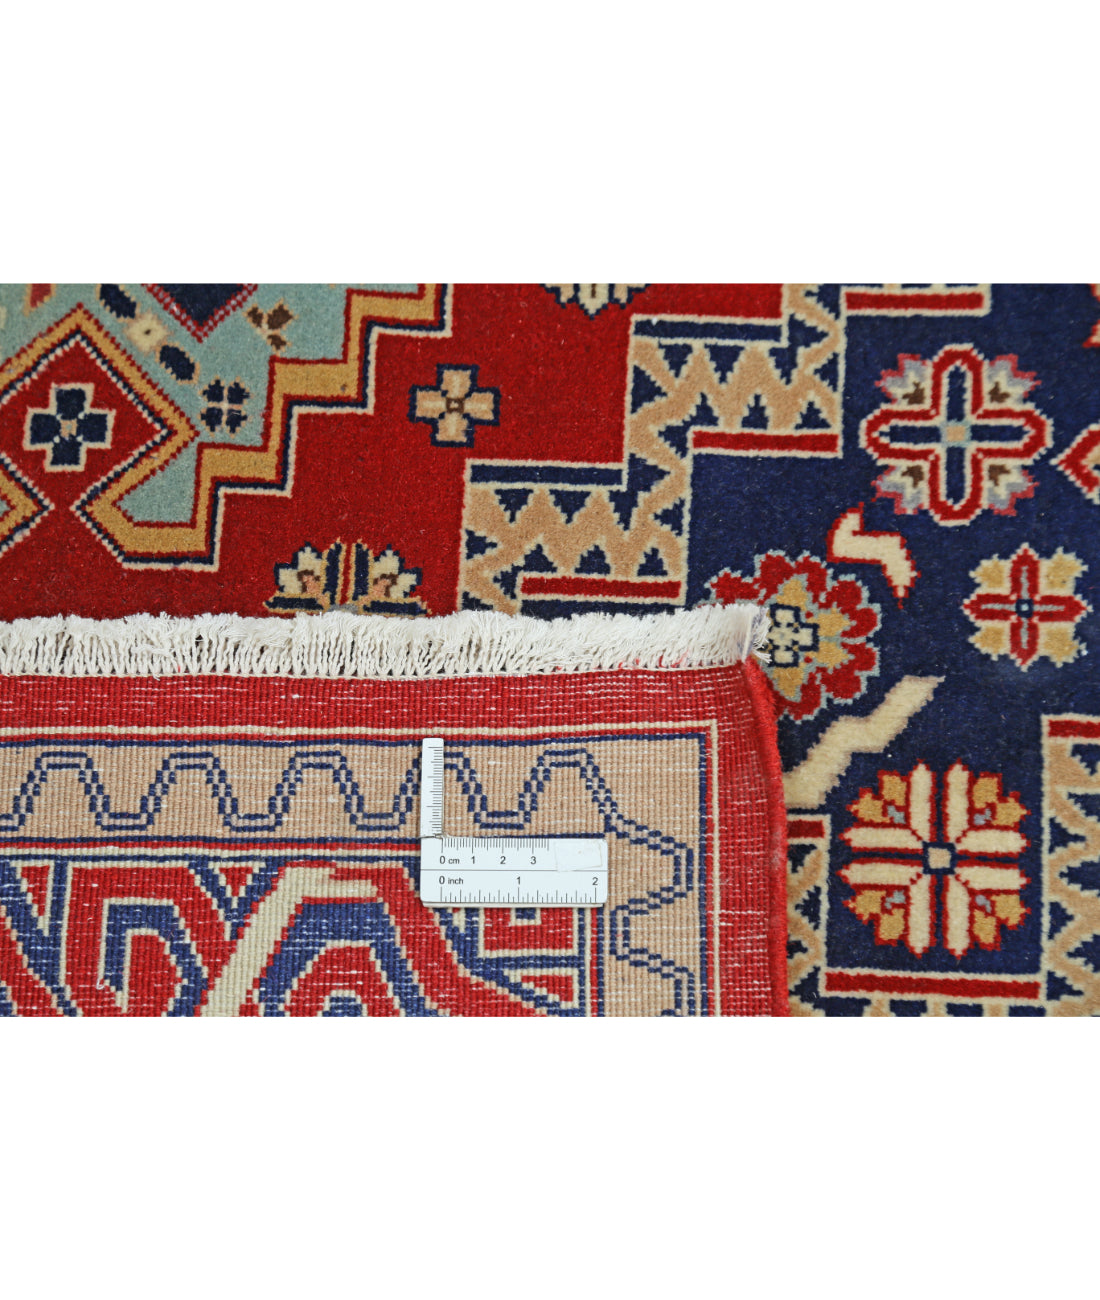 Heritage 7' 11" X 9' 11" Hand-Knotted Wool Rug 7' 11" X 9' 11" (241 X 302) / Red / Blue